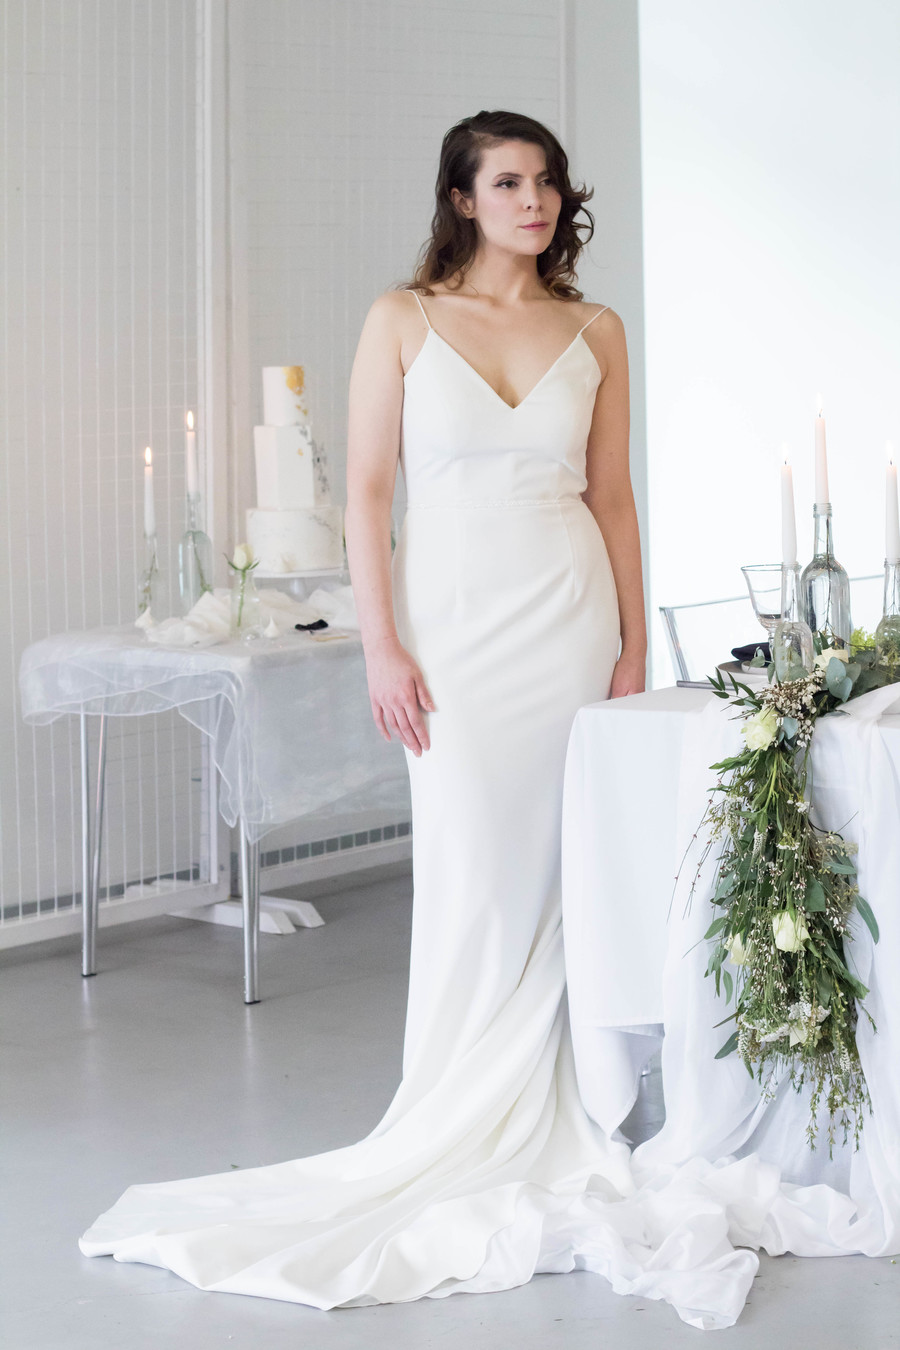 Sleek and modern wedding inspiration from Wakefield with Lam D Peretti Photography (19)